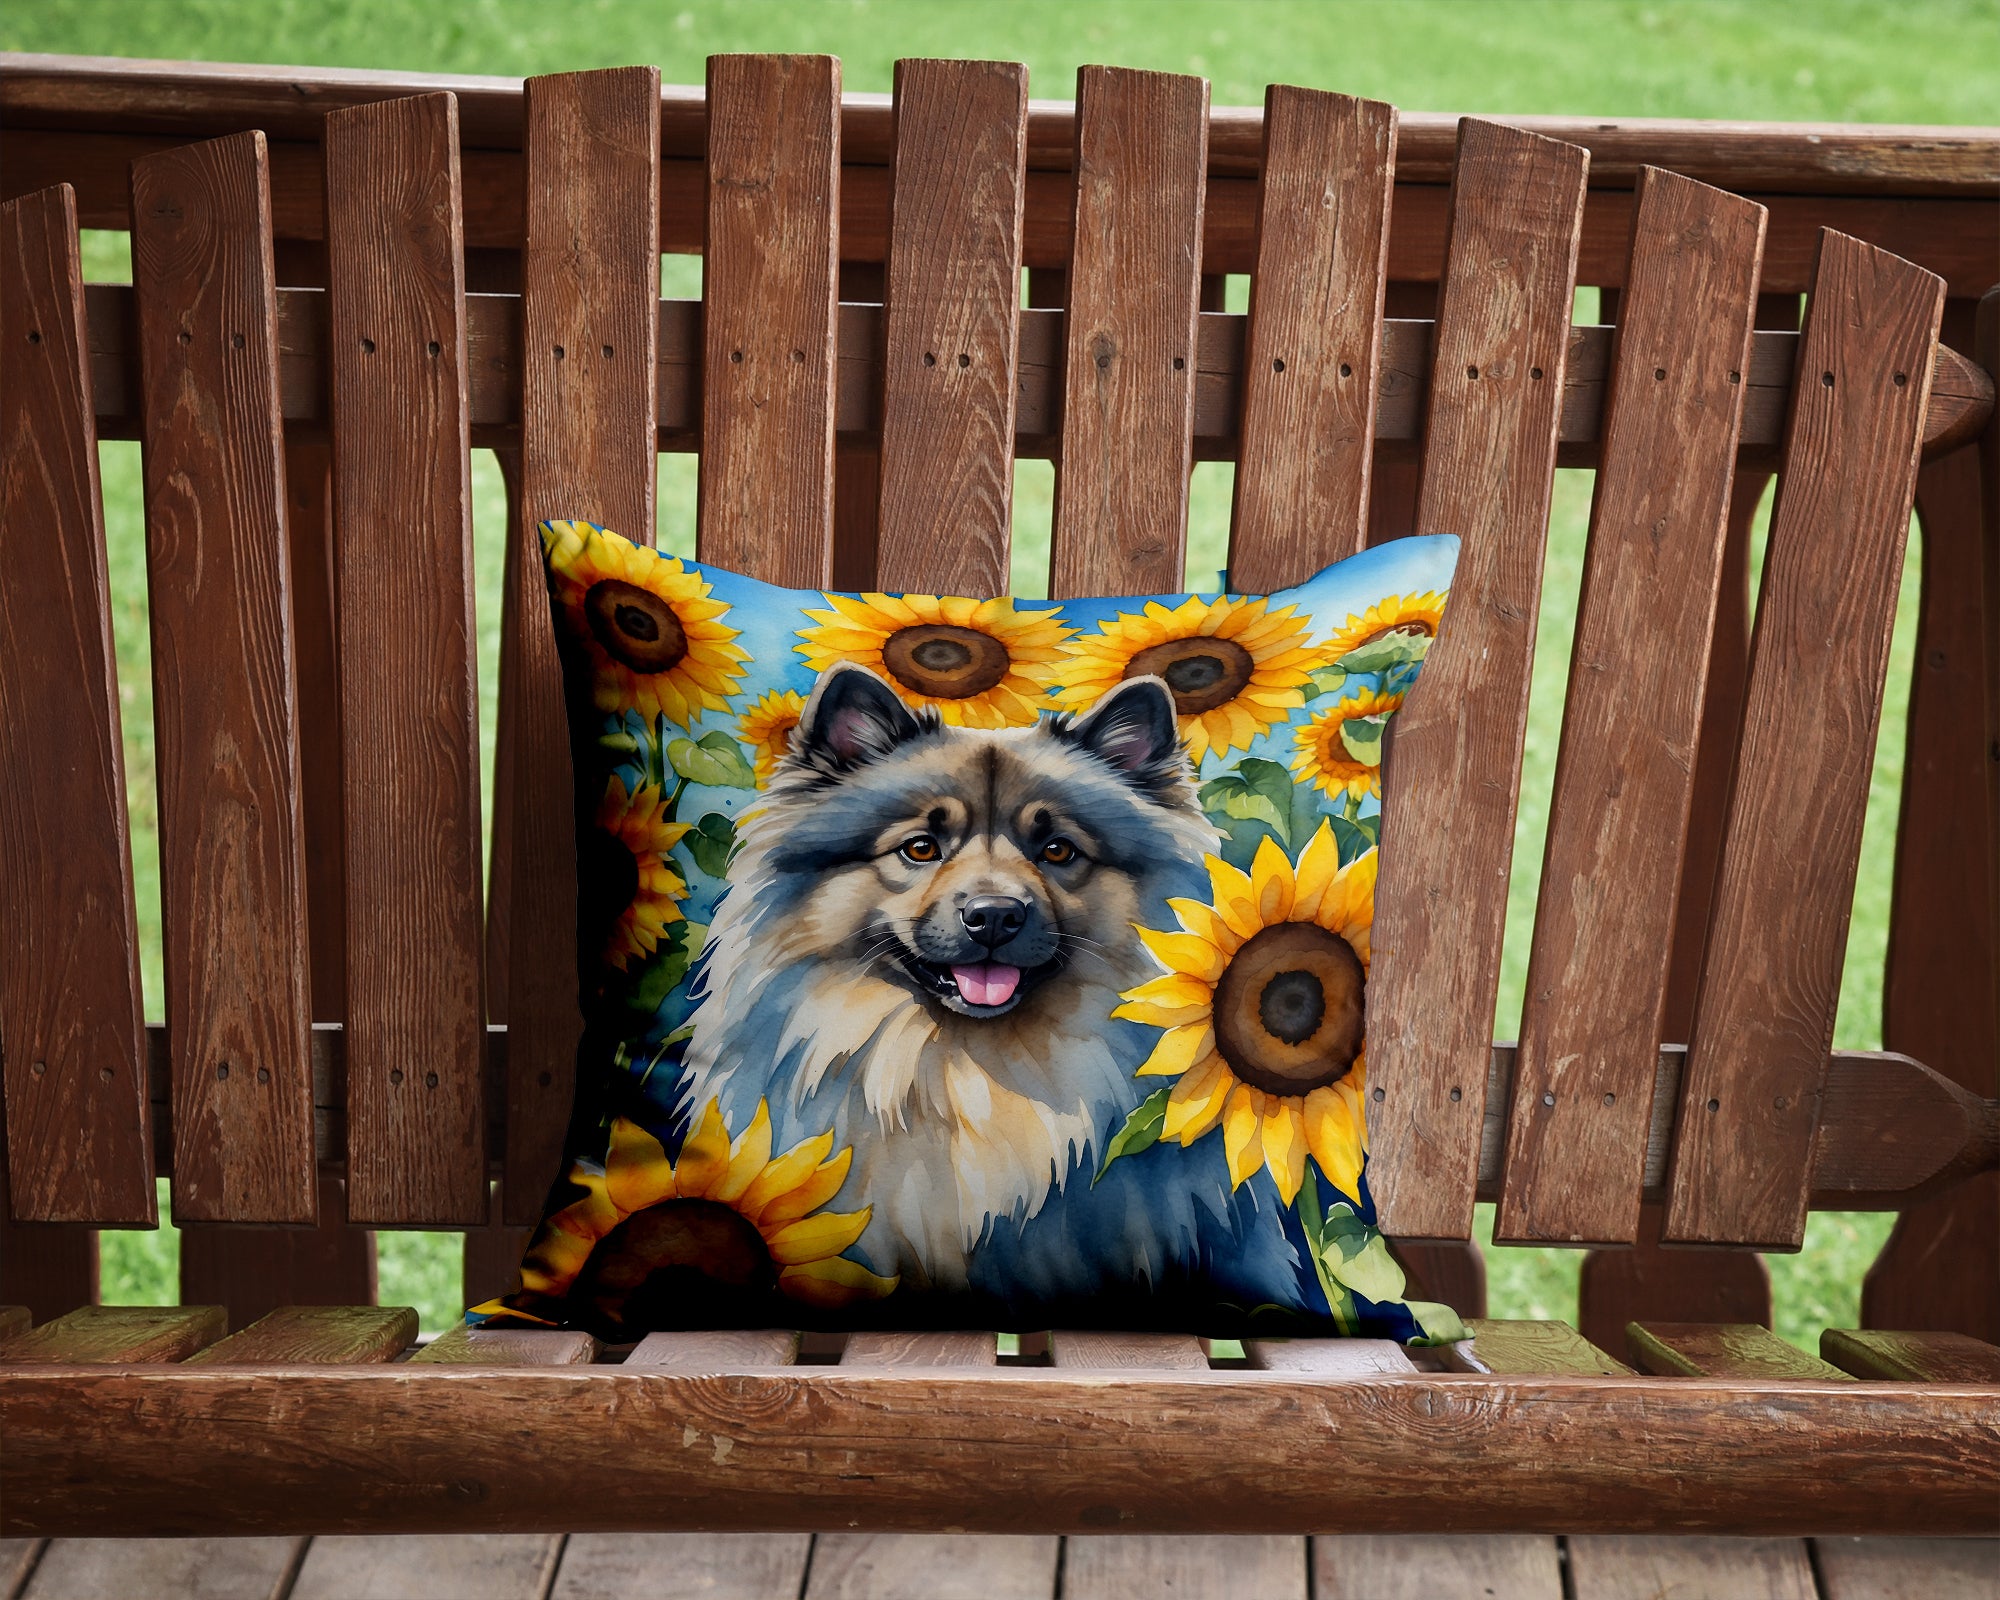 Buy this Keeshond in Sunflowers Throw Pillow